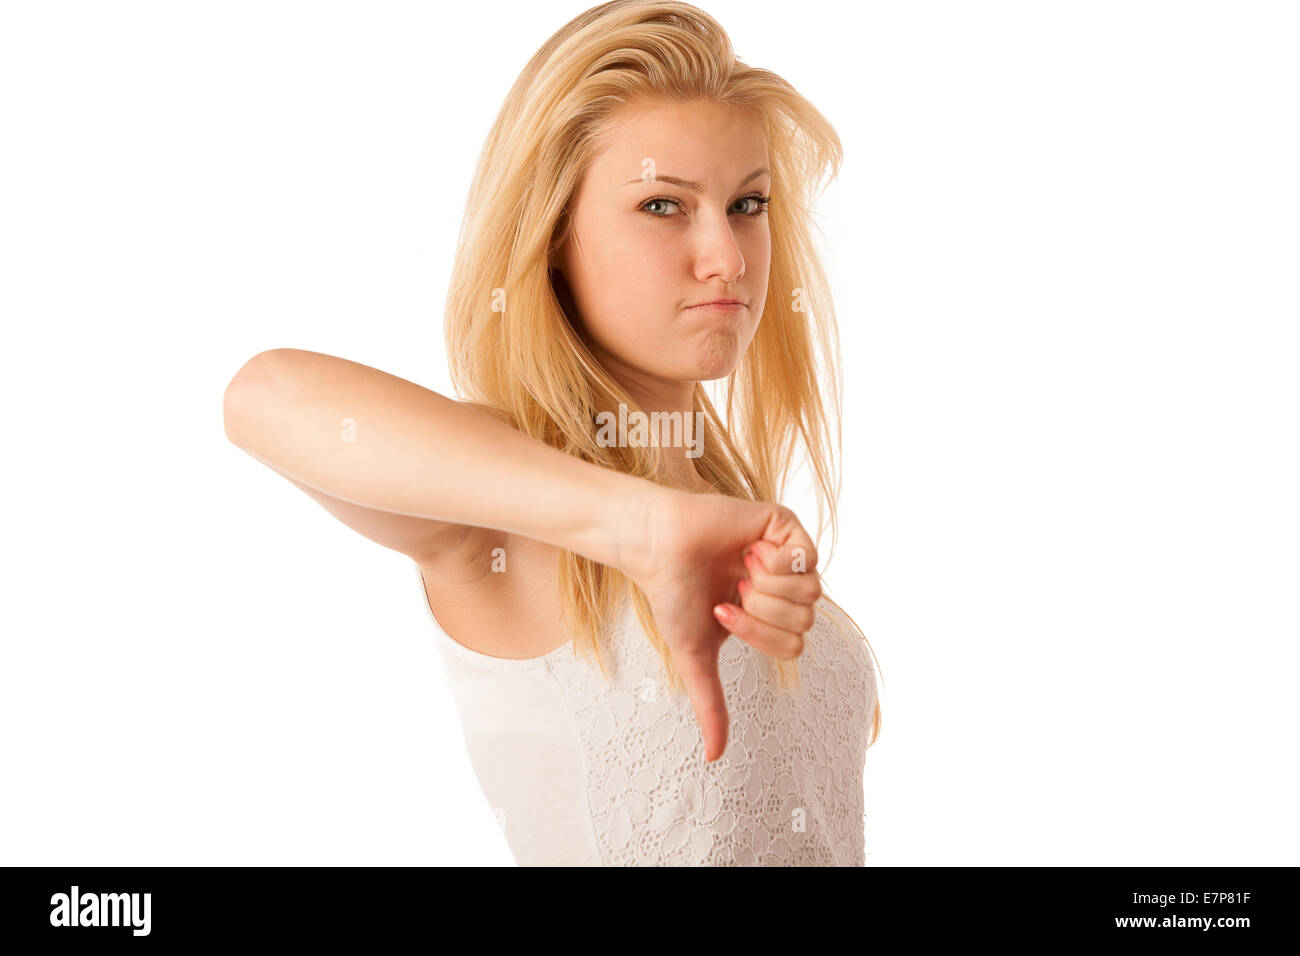 Young blonde woman with blue eyes gesturing failure and ange with showing thumb down isolated over white background Stock Photo